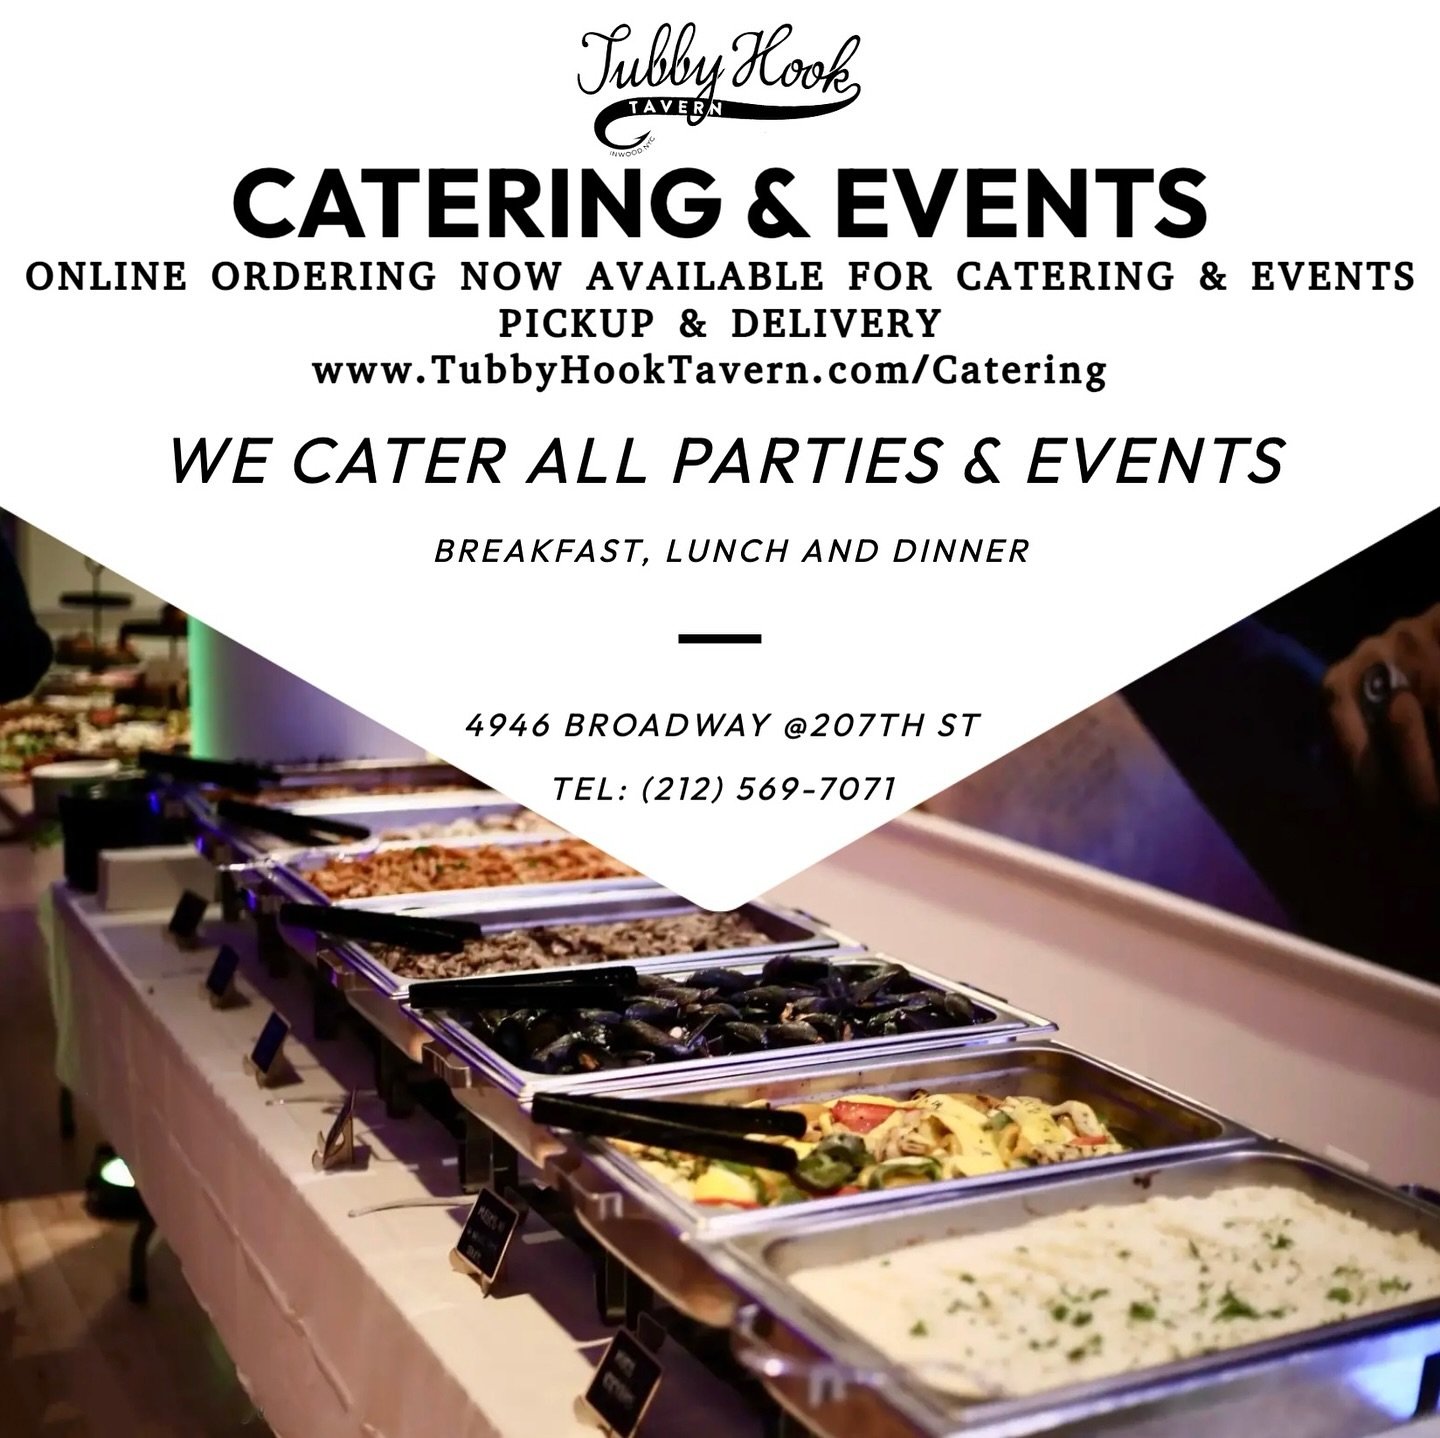 Hosting a party? Introducing our new online ordering system for catering &amp; events, pickup &amp; delivery available! 🍽️ Now you can easily plan your next gathering with just a few clicks. Visit our website to explore our menu options and make you